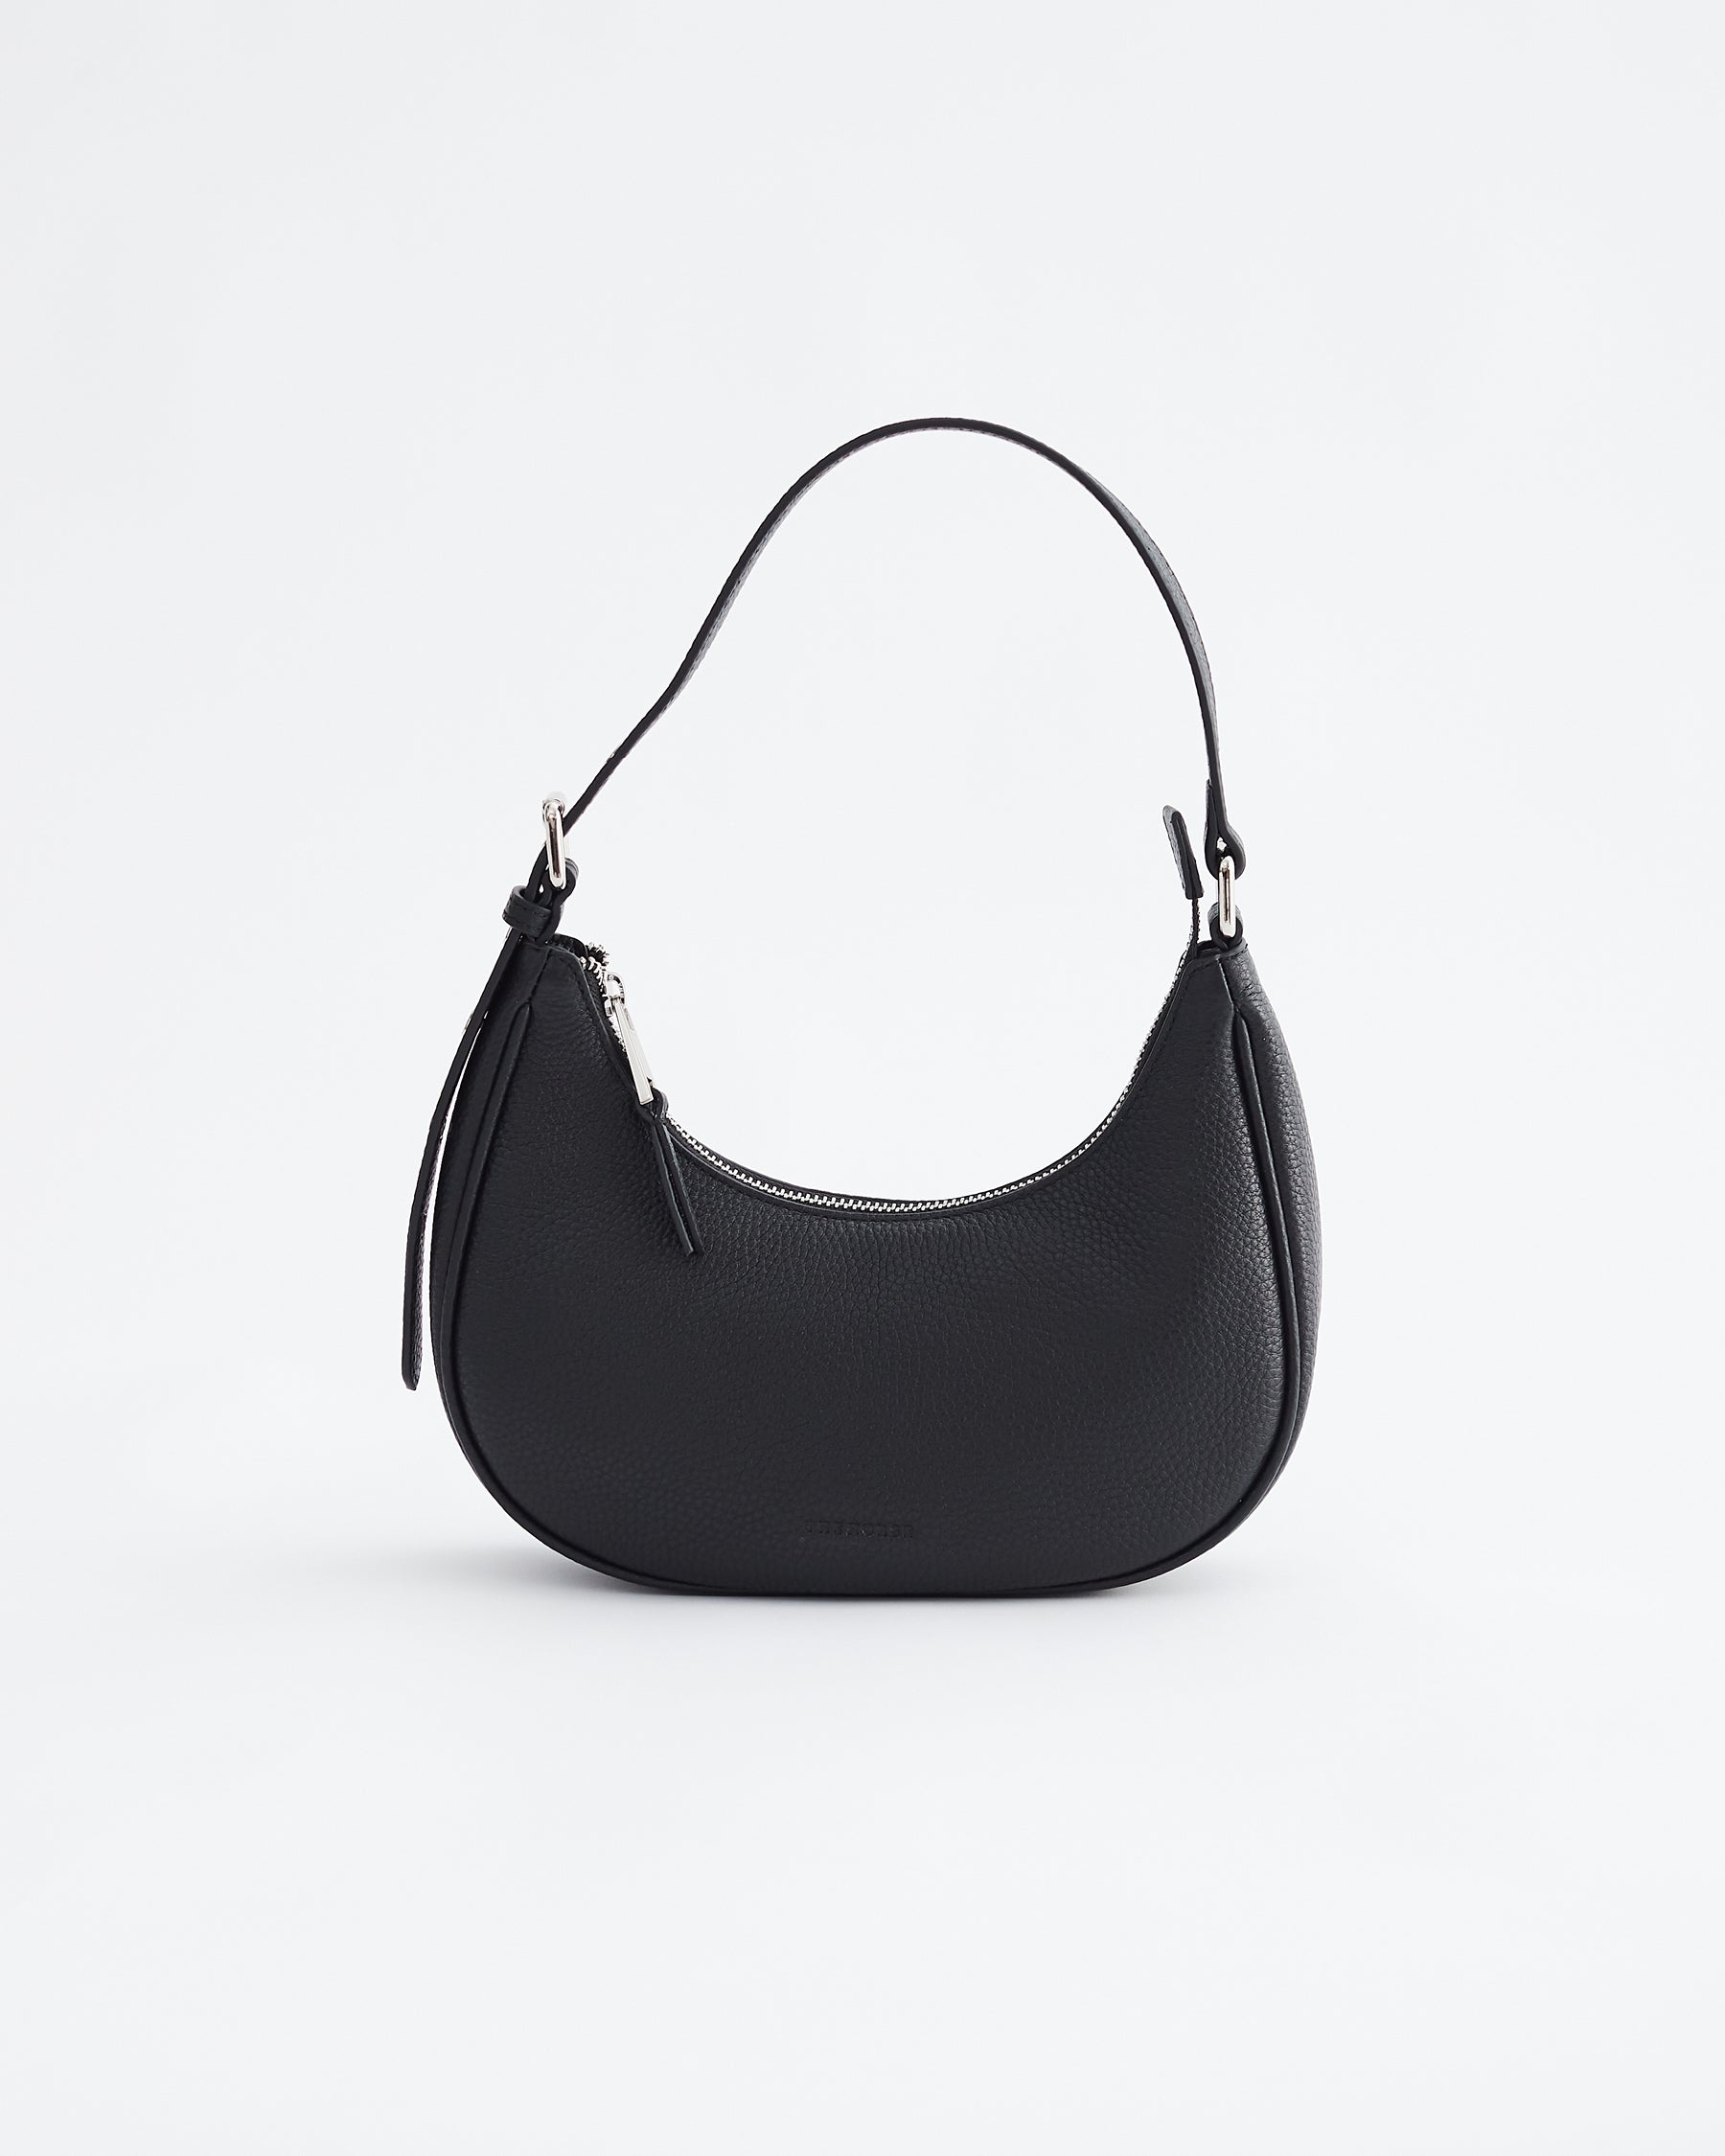 Friday Bag: Leather Crescent Bag in Black by The Horse®